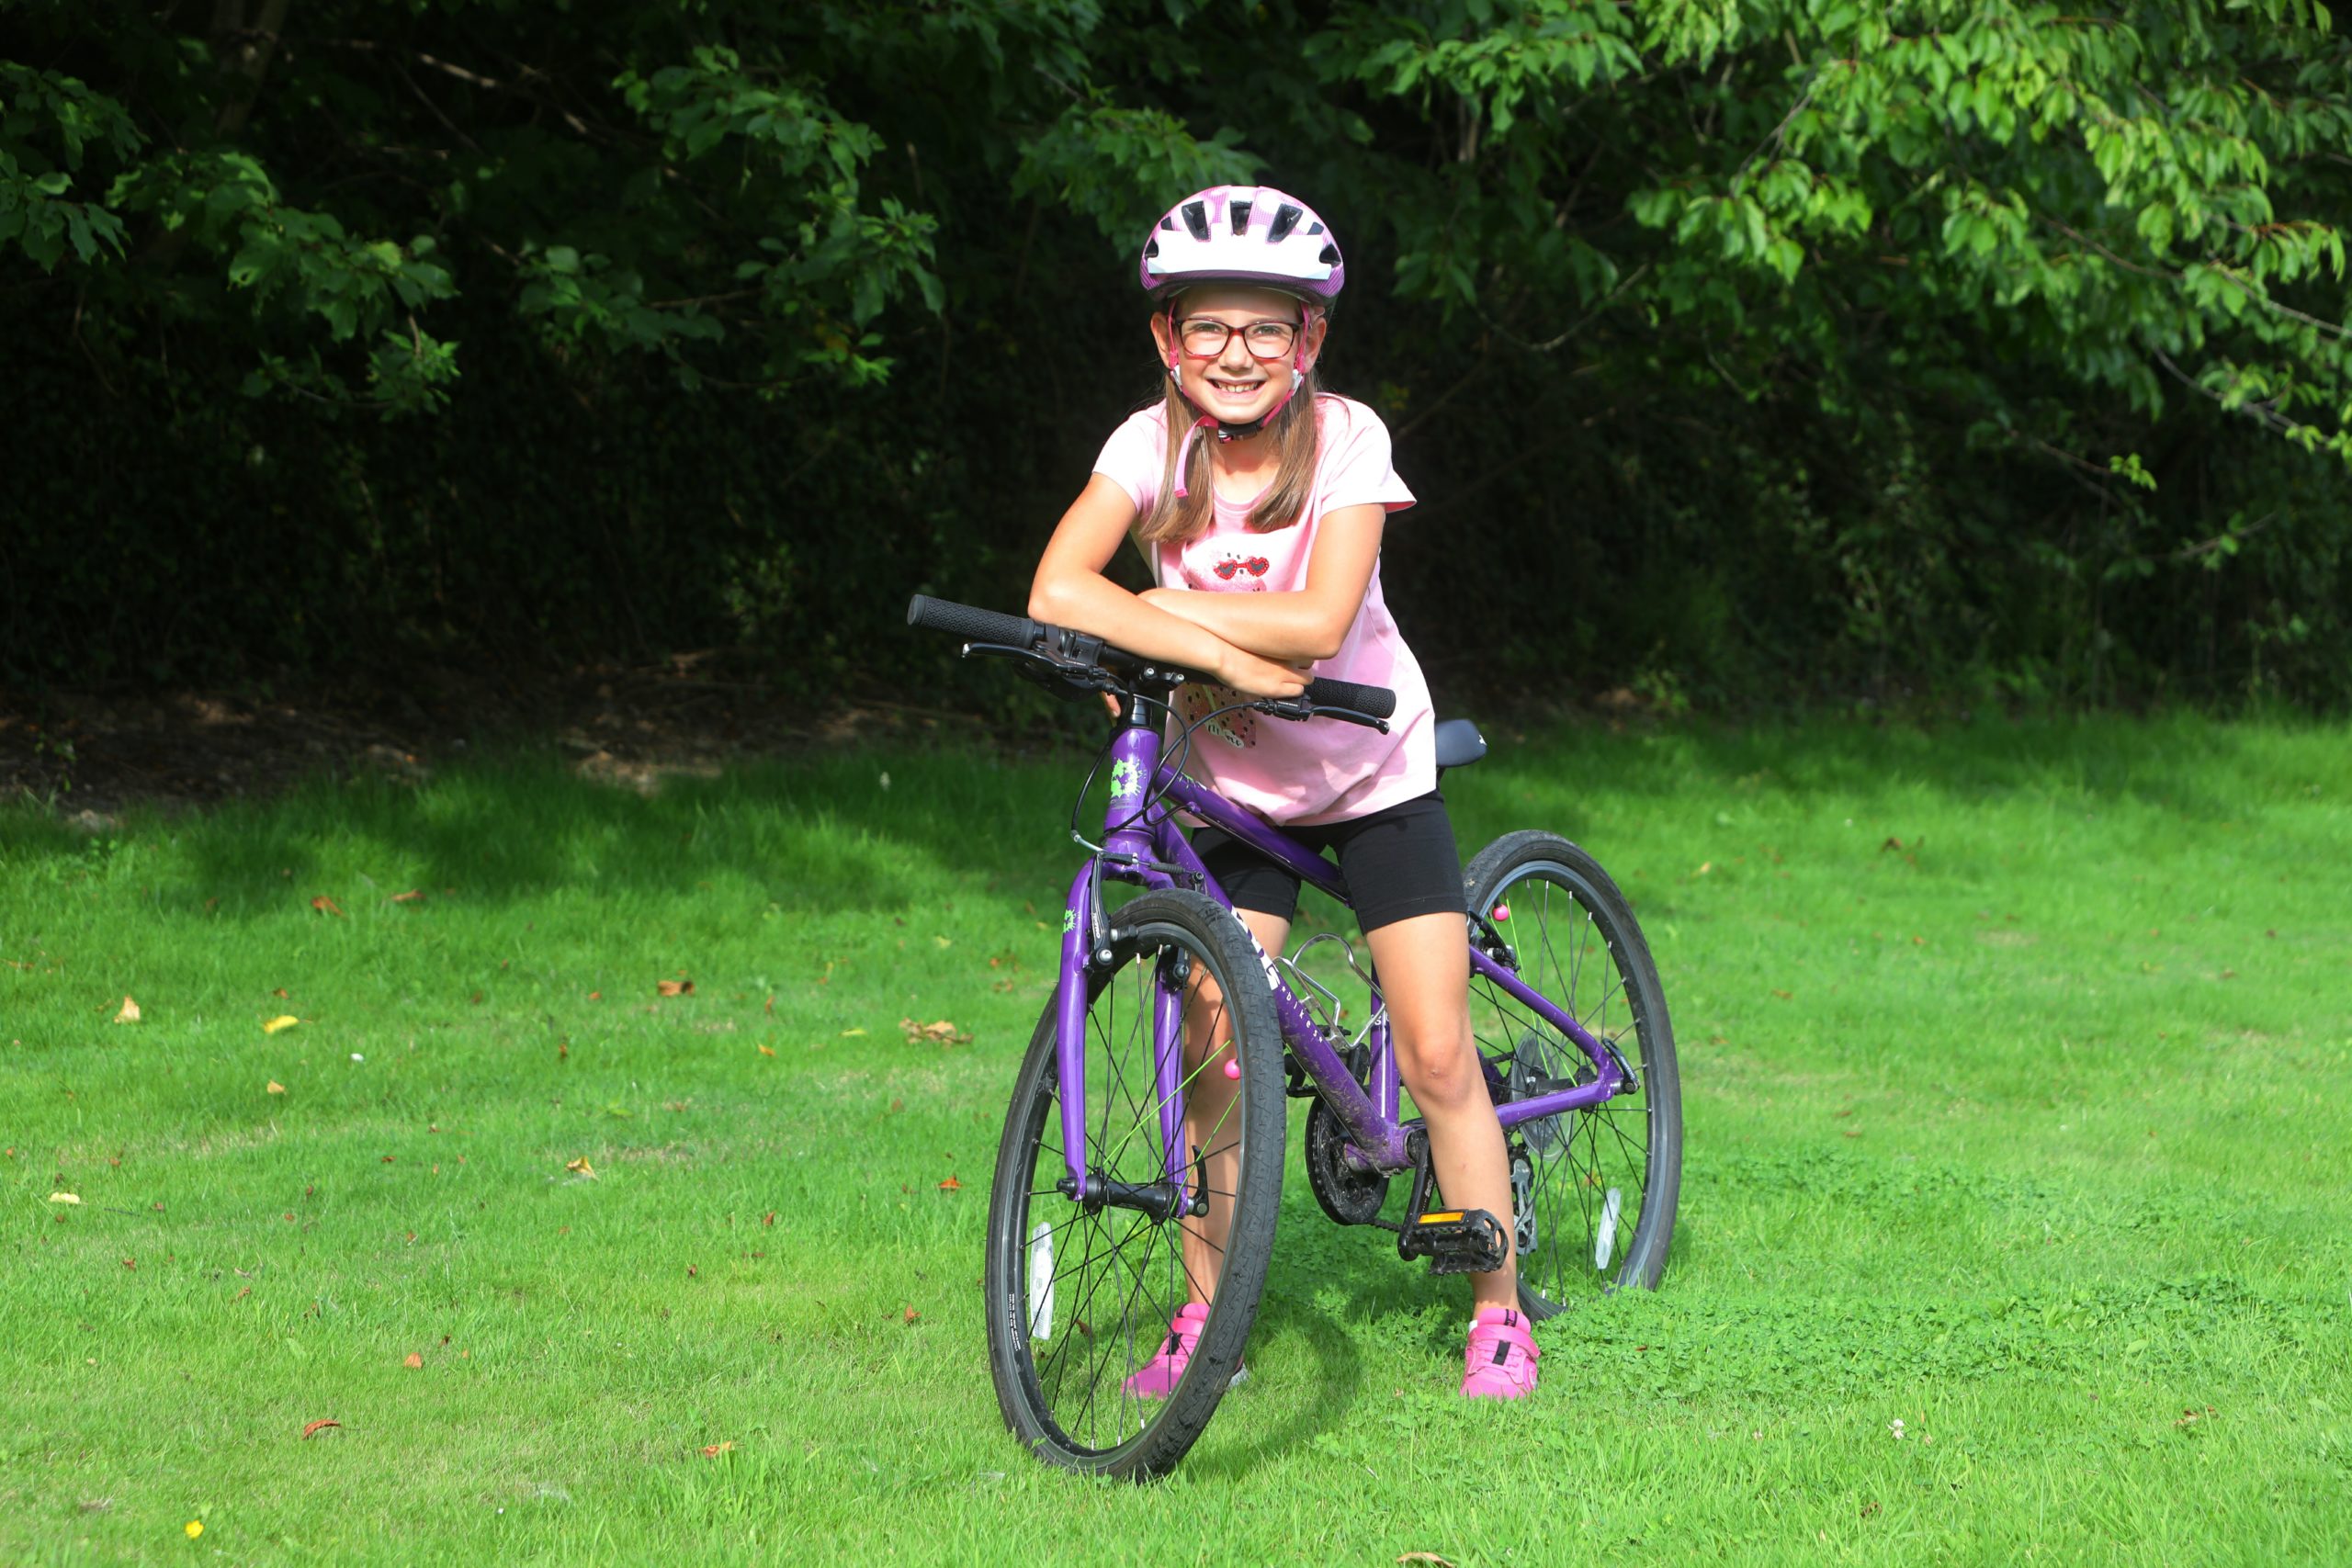 Katie has cycled 1000 miles on her favourite purple bike